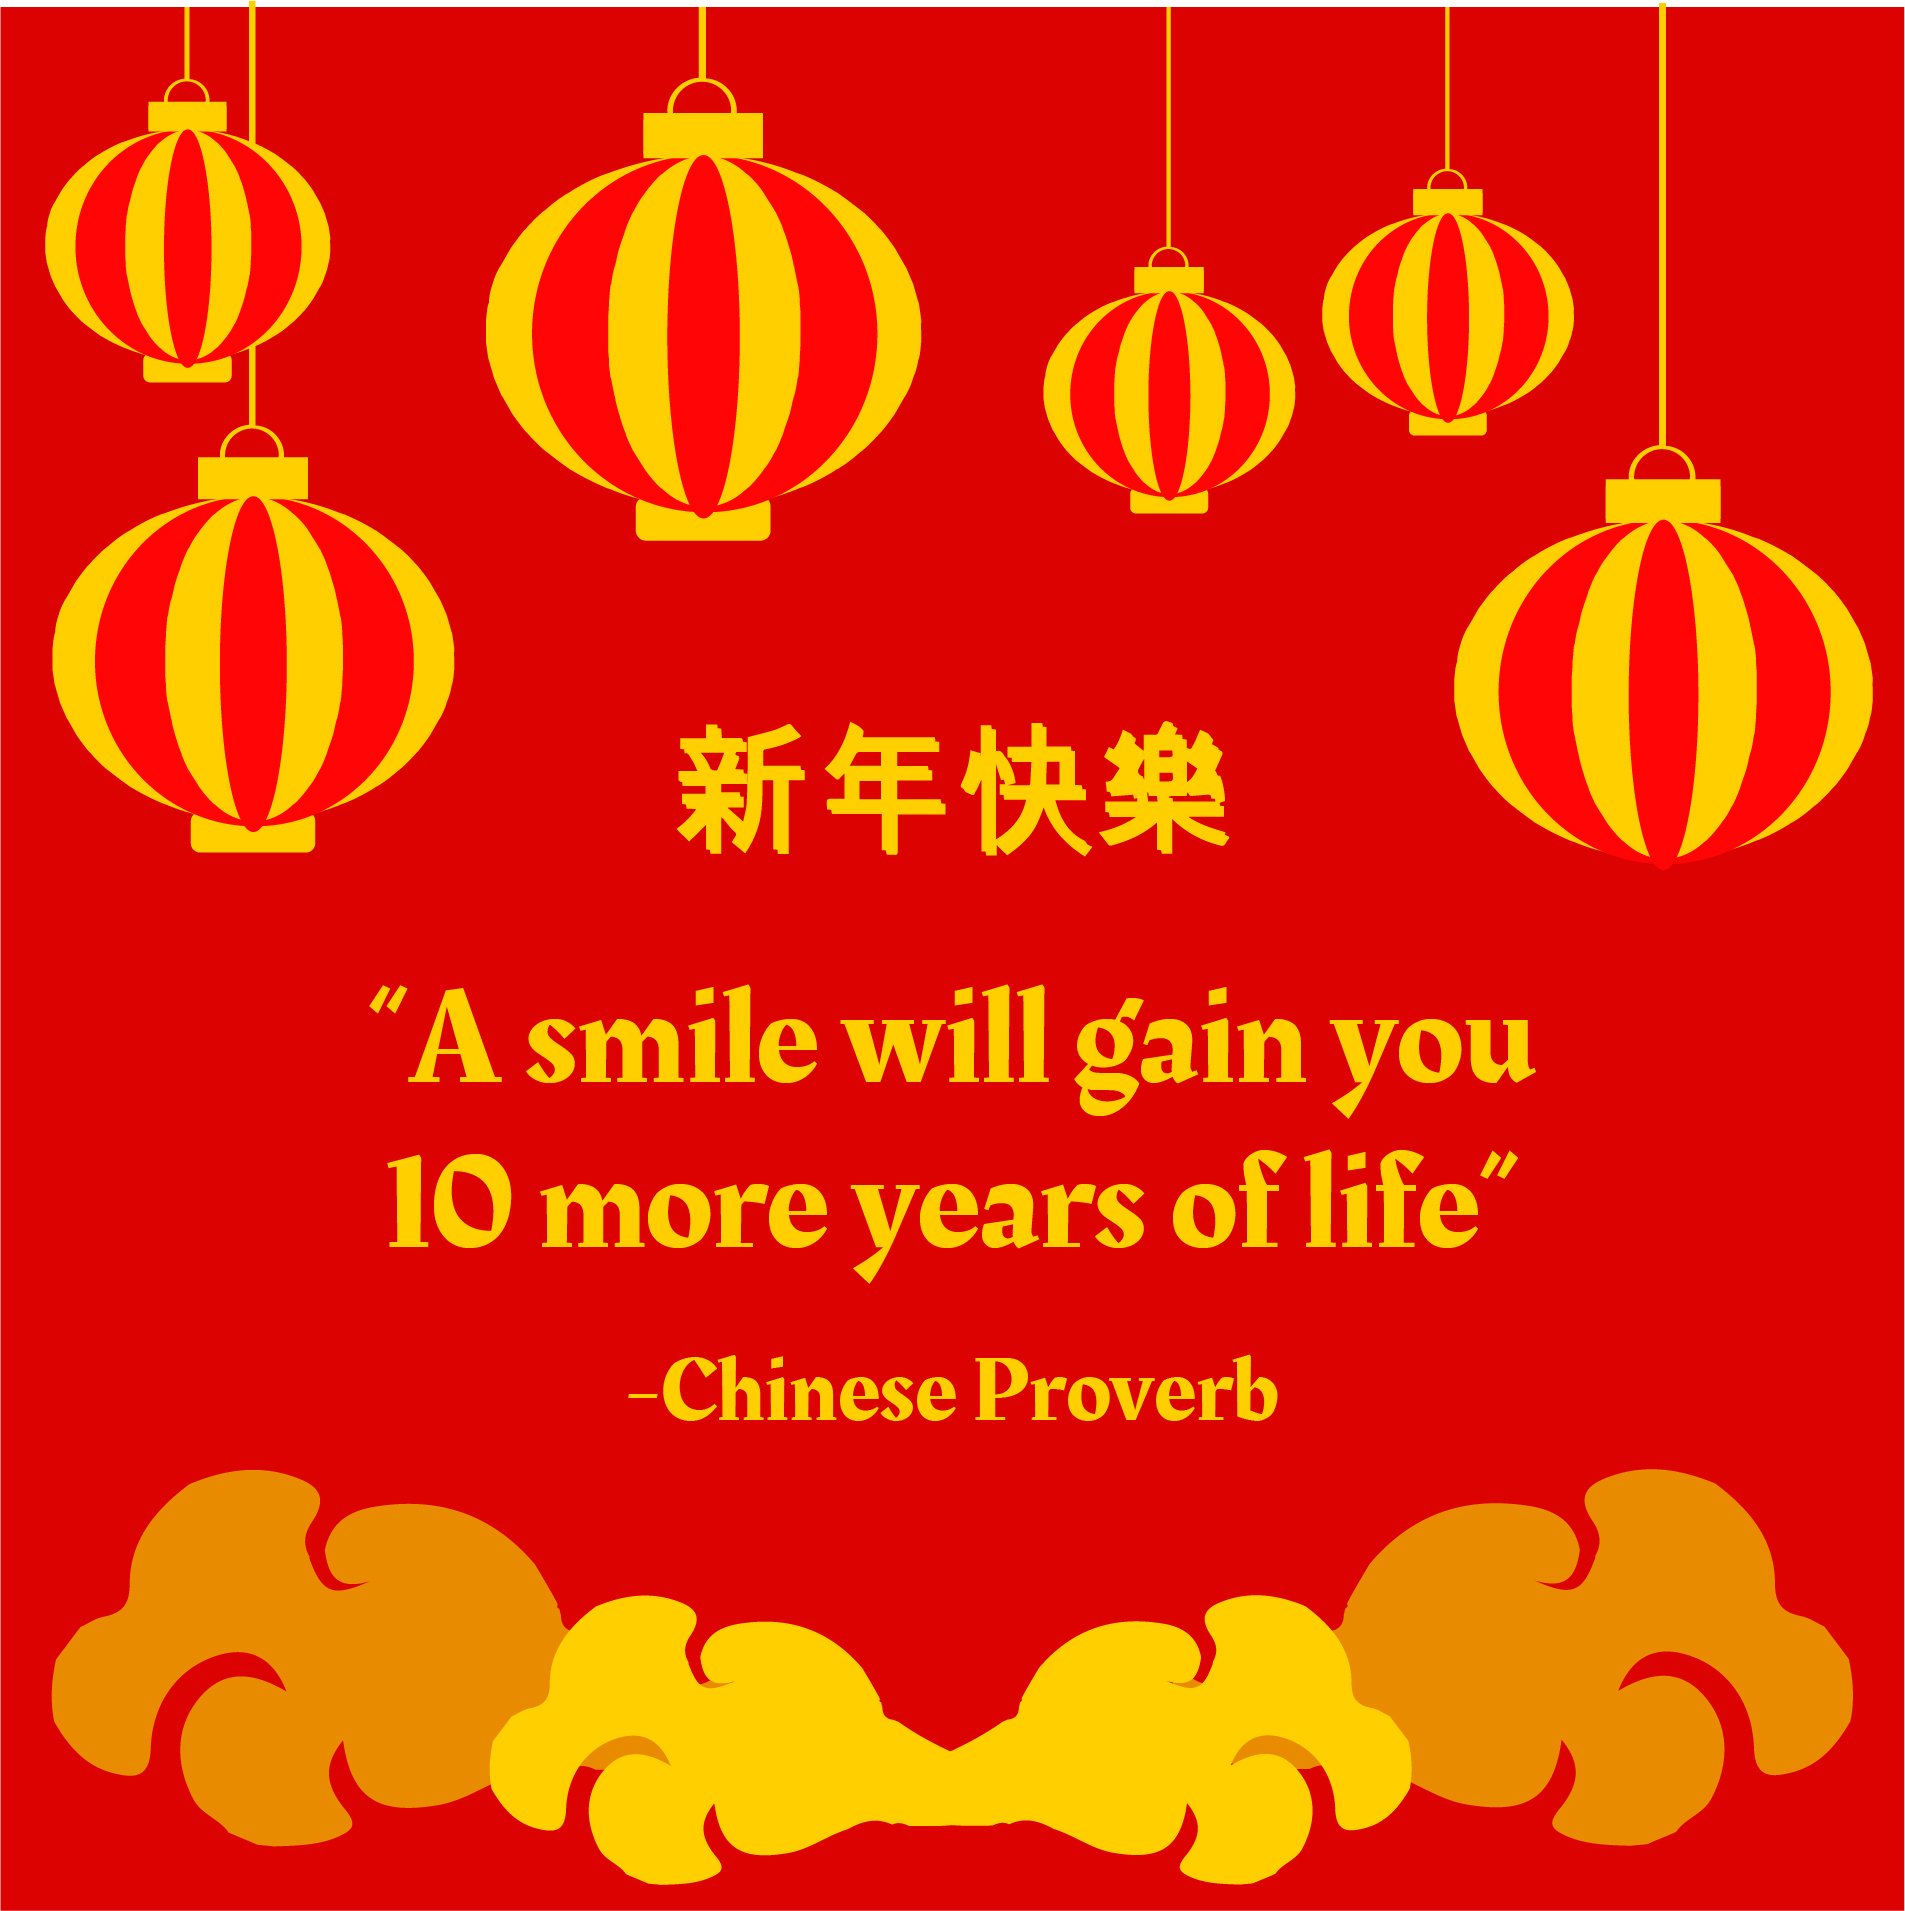 Chinese New Year Quote Vector in Illustrator, PSD, EPS, SVG, JPG, PNG